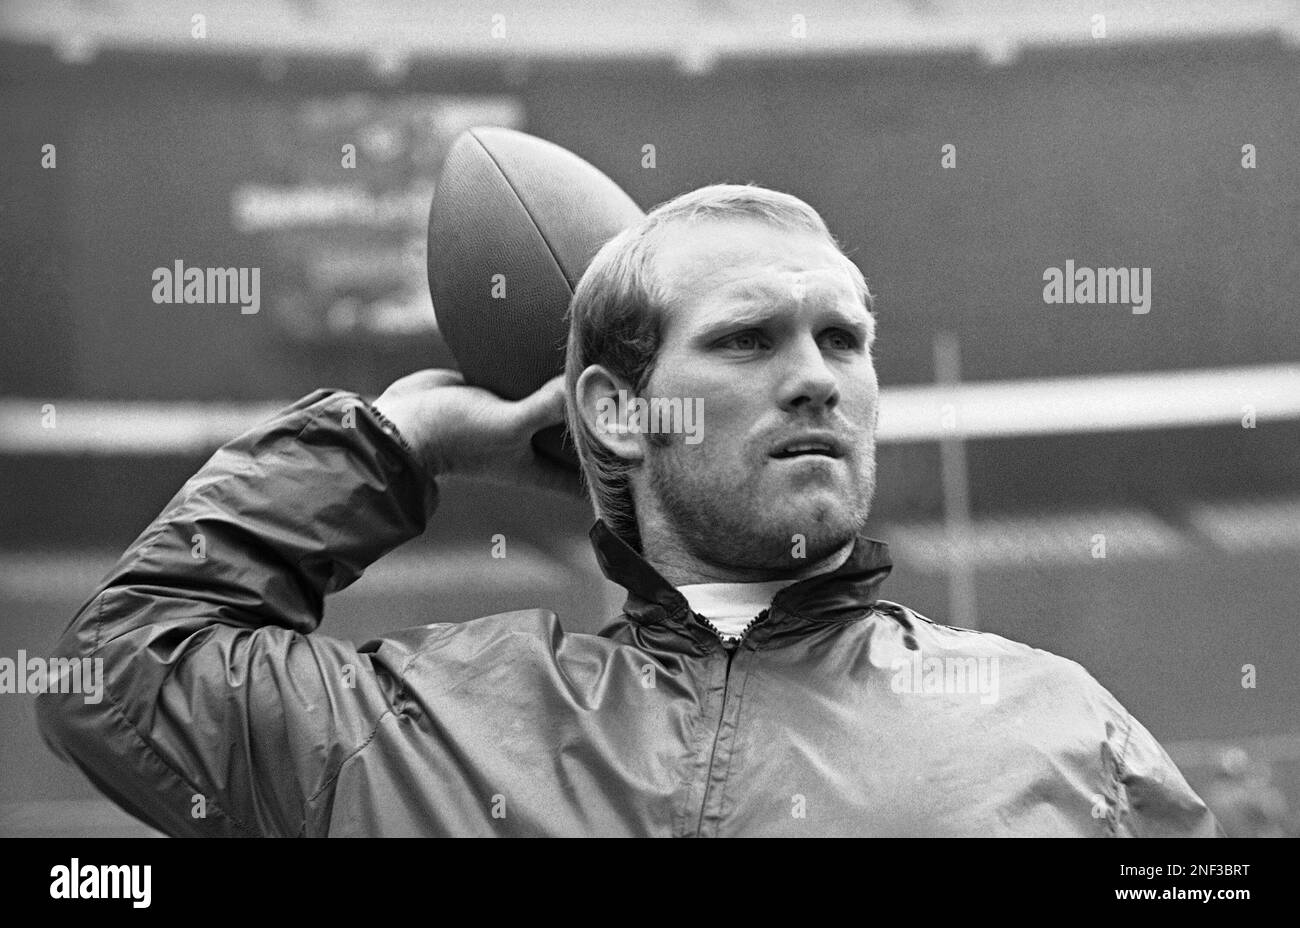 Steelers reserve quarterback Terry Bradshaw, sporting an early beard, warms  up his throwing arm on the sideline prior to entering 17-0 loss to the  Oakland Raiders in Pittsburgh, Sept. 29, 1974. Bradshaw